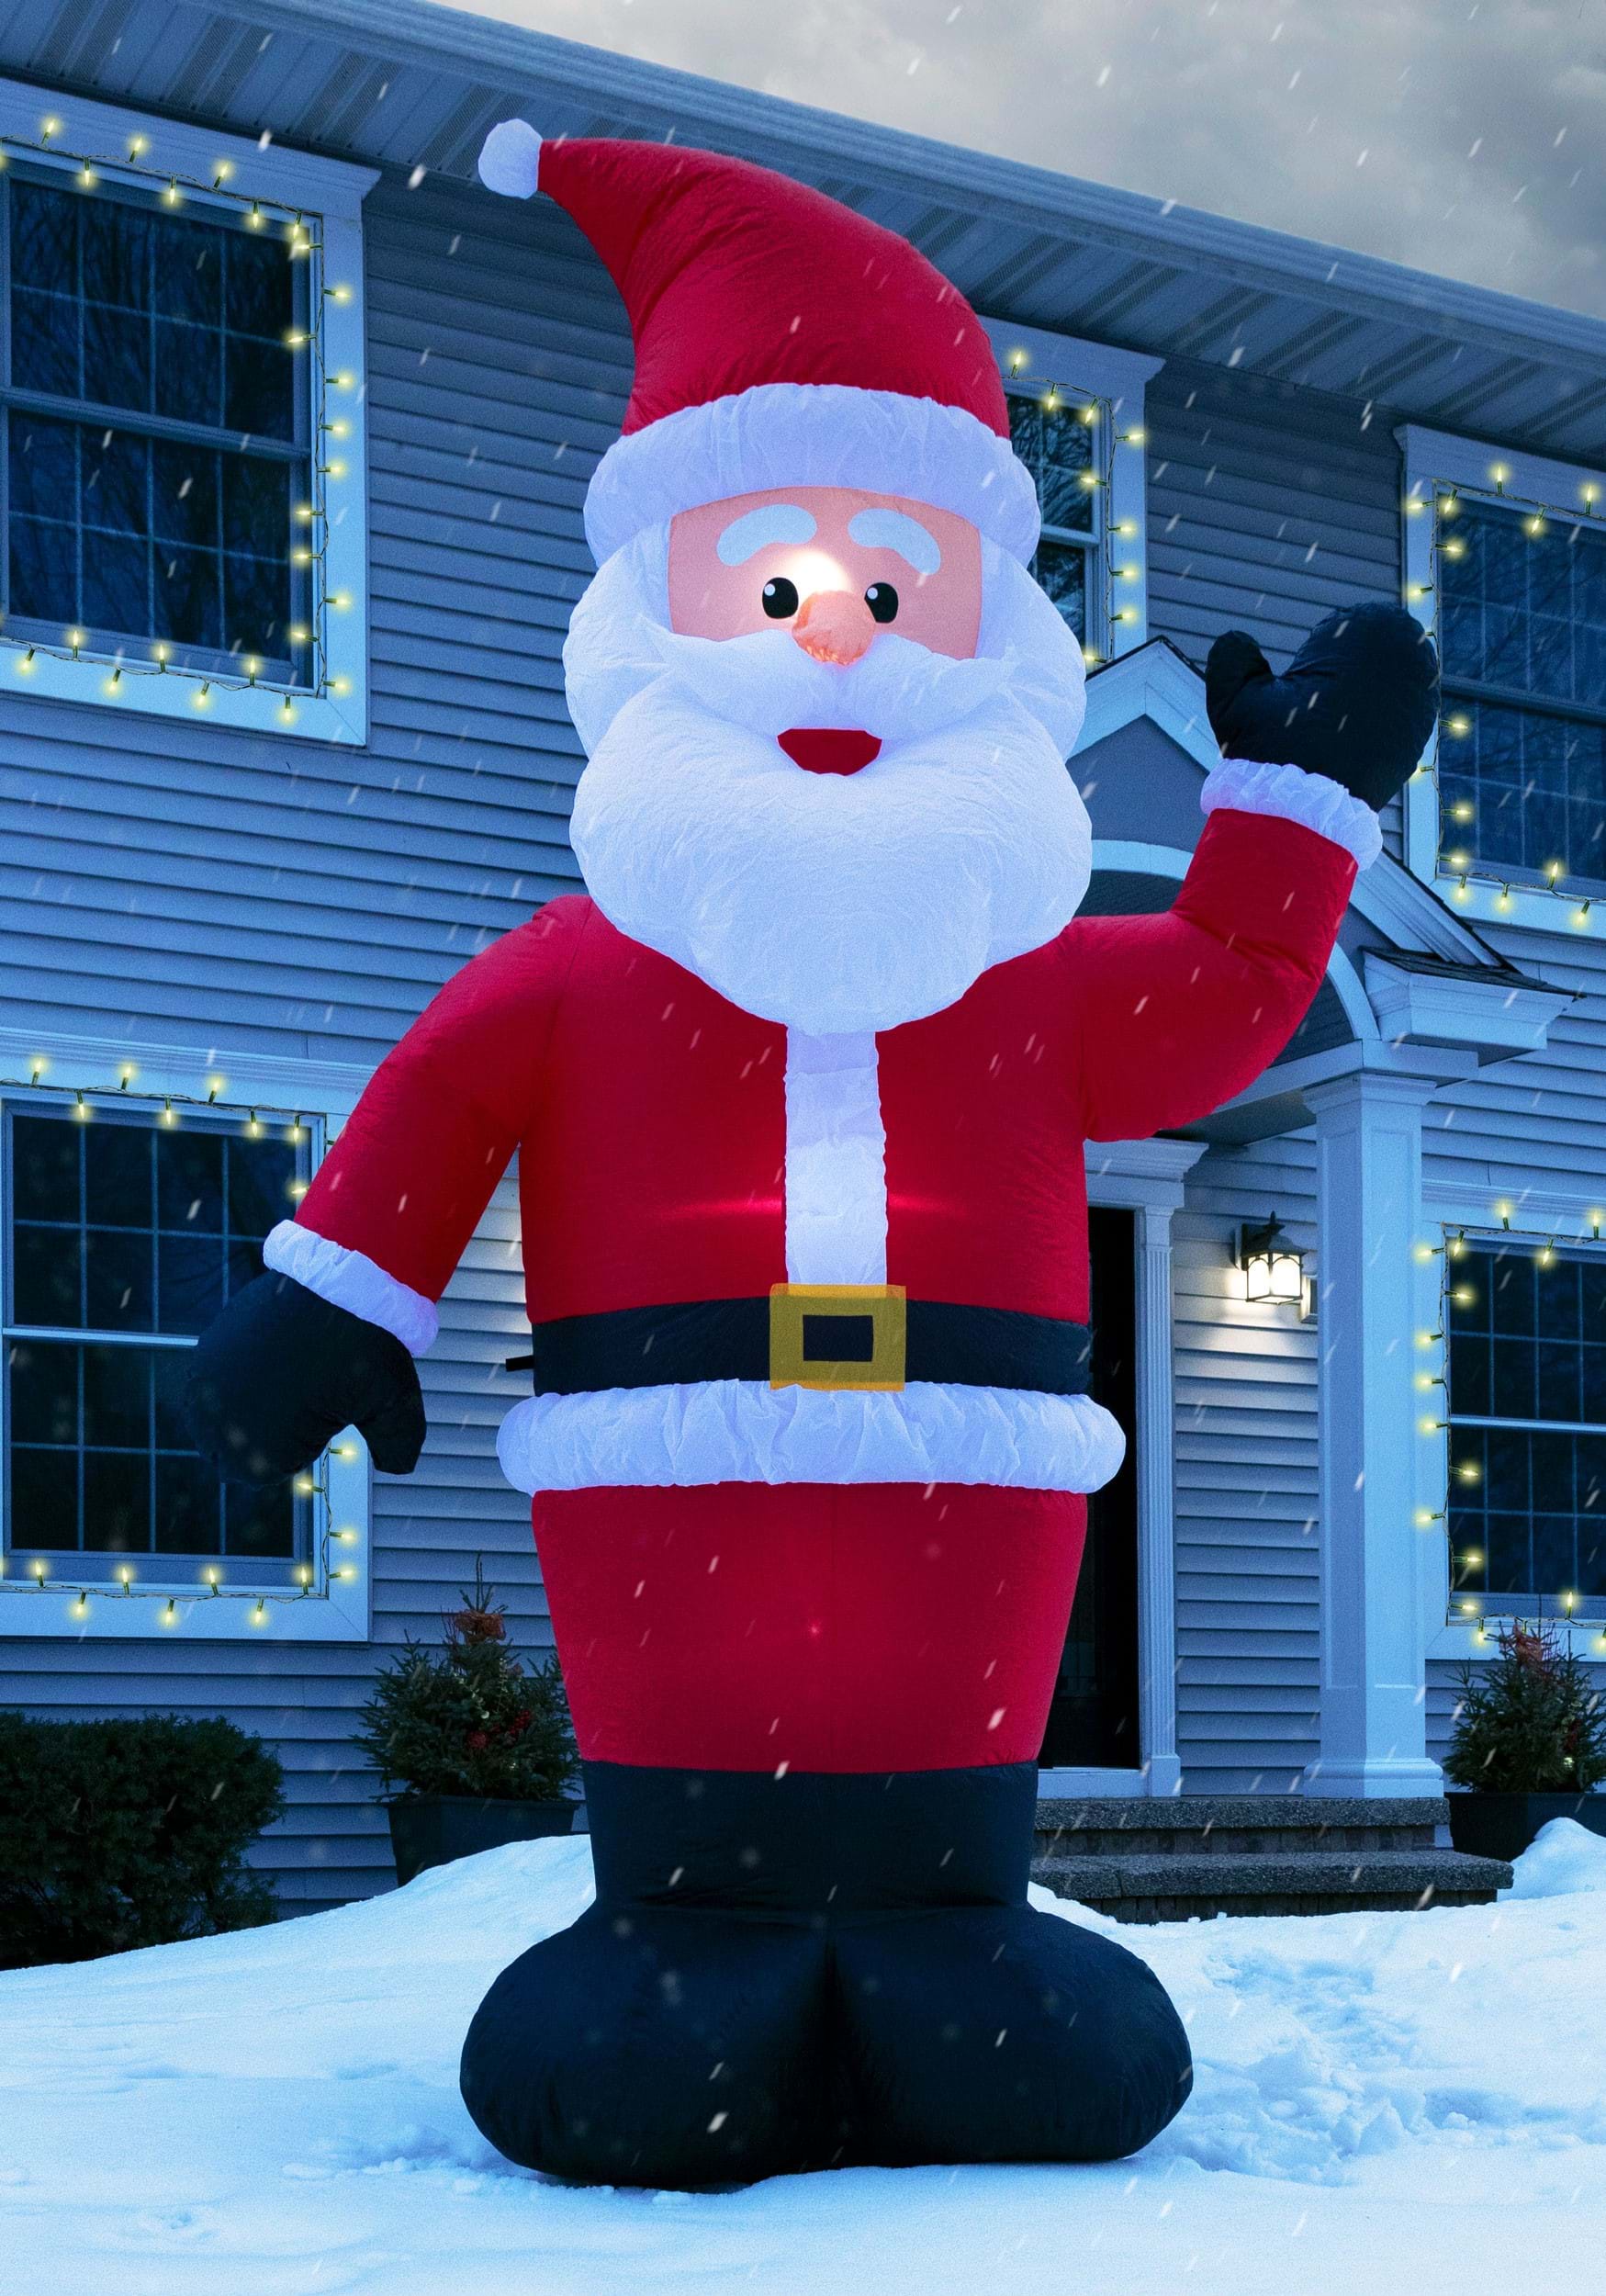 https://images.halloweencostumes.com/products/80271/1-1/10-ft-giant-santa-inflatable-christmas-decoration.jpg